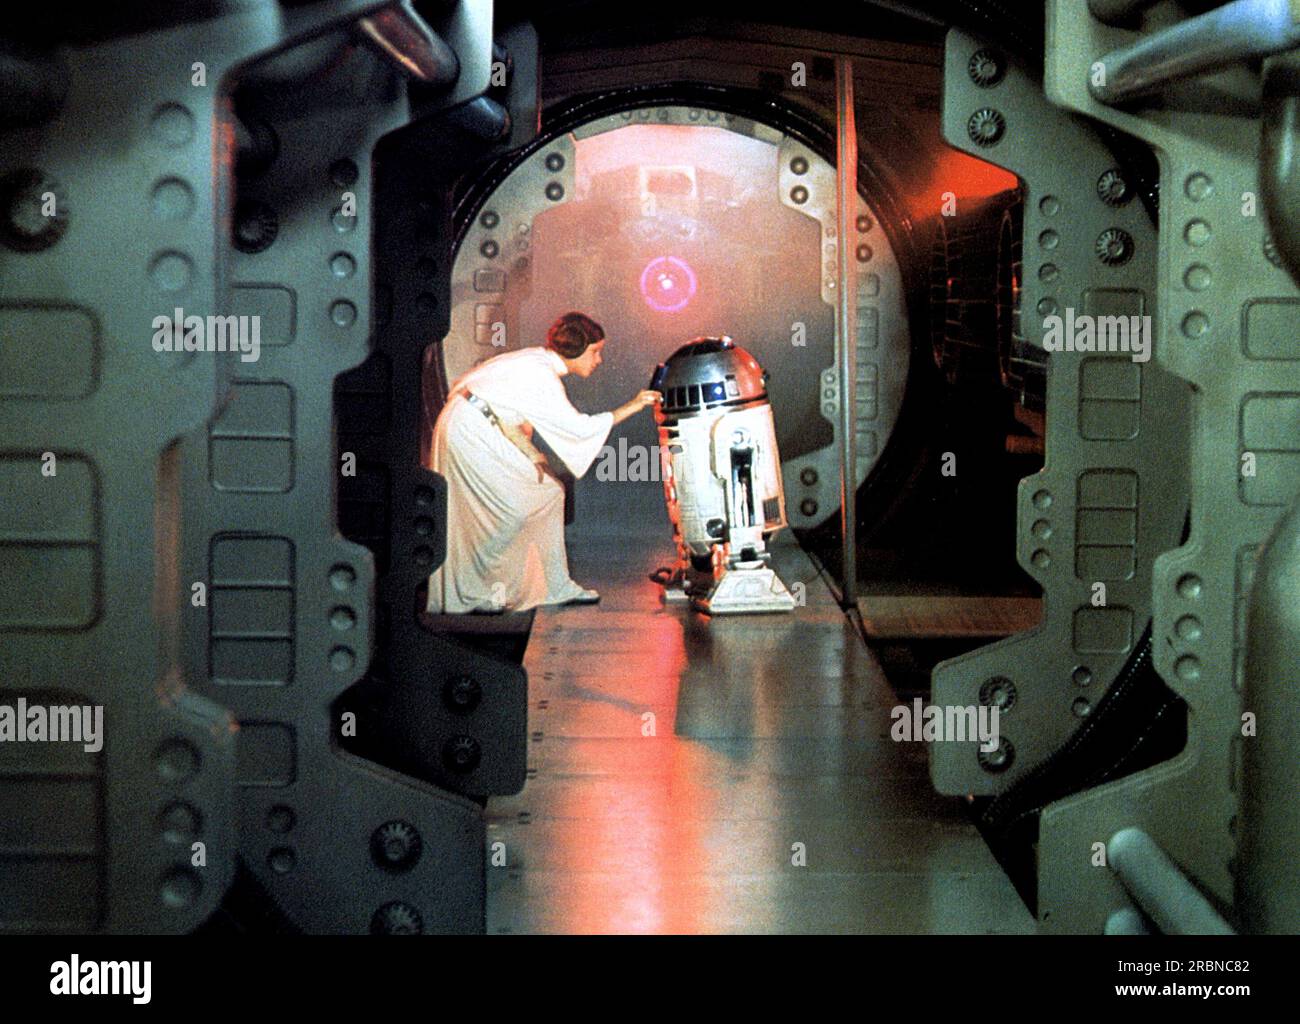 Star Wars  Star Wars Episode IV : A New Hope  Carrie Fisher  Princess Leia & R2-D2 Stock Photo